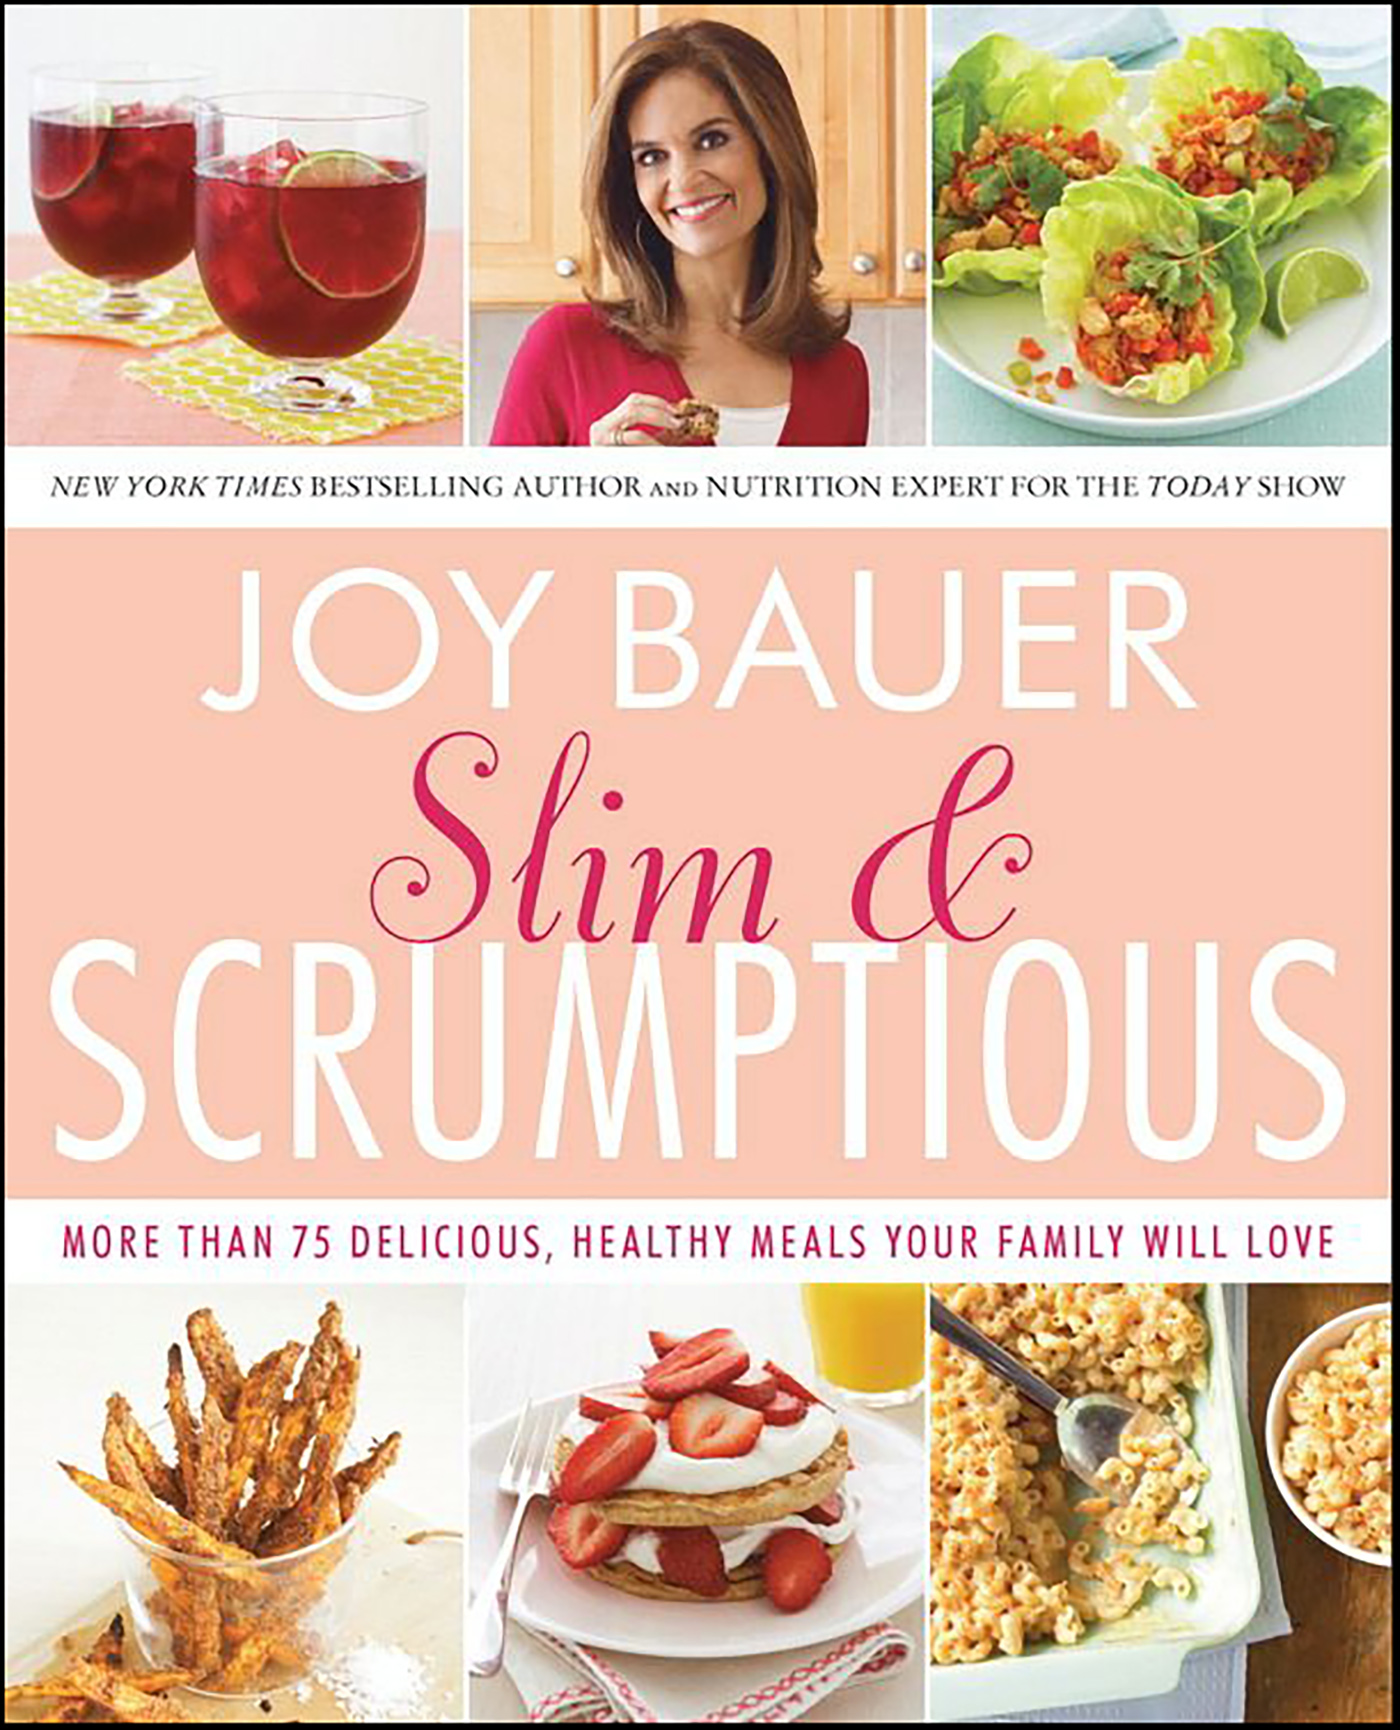 Slim and scrumptious more than 75 delicious, healthy meals your family will love cover image